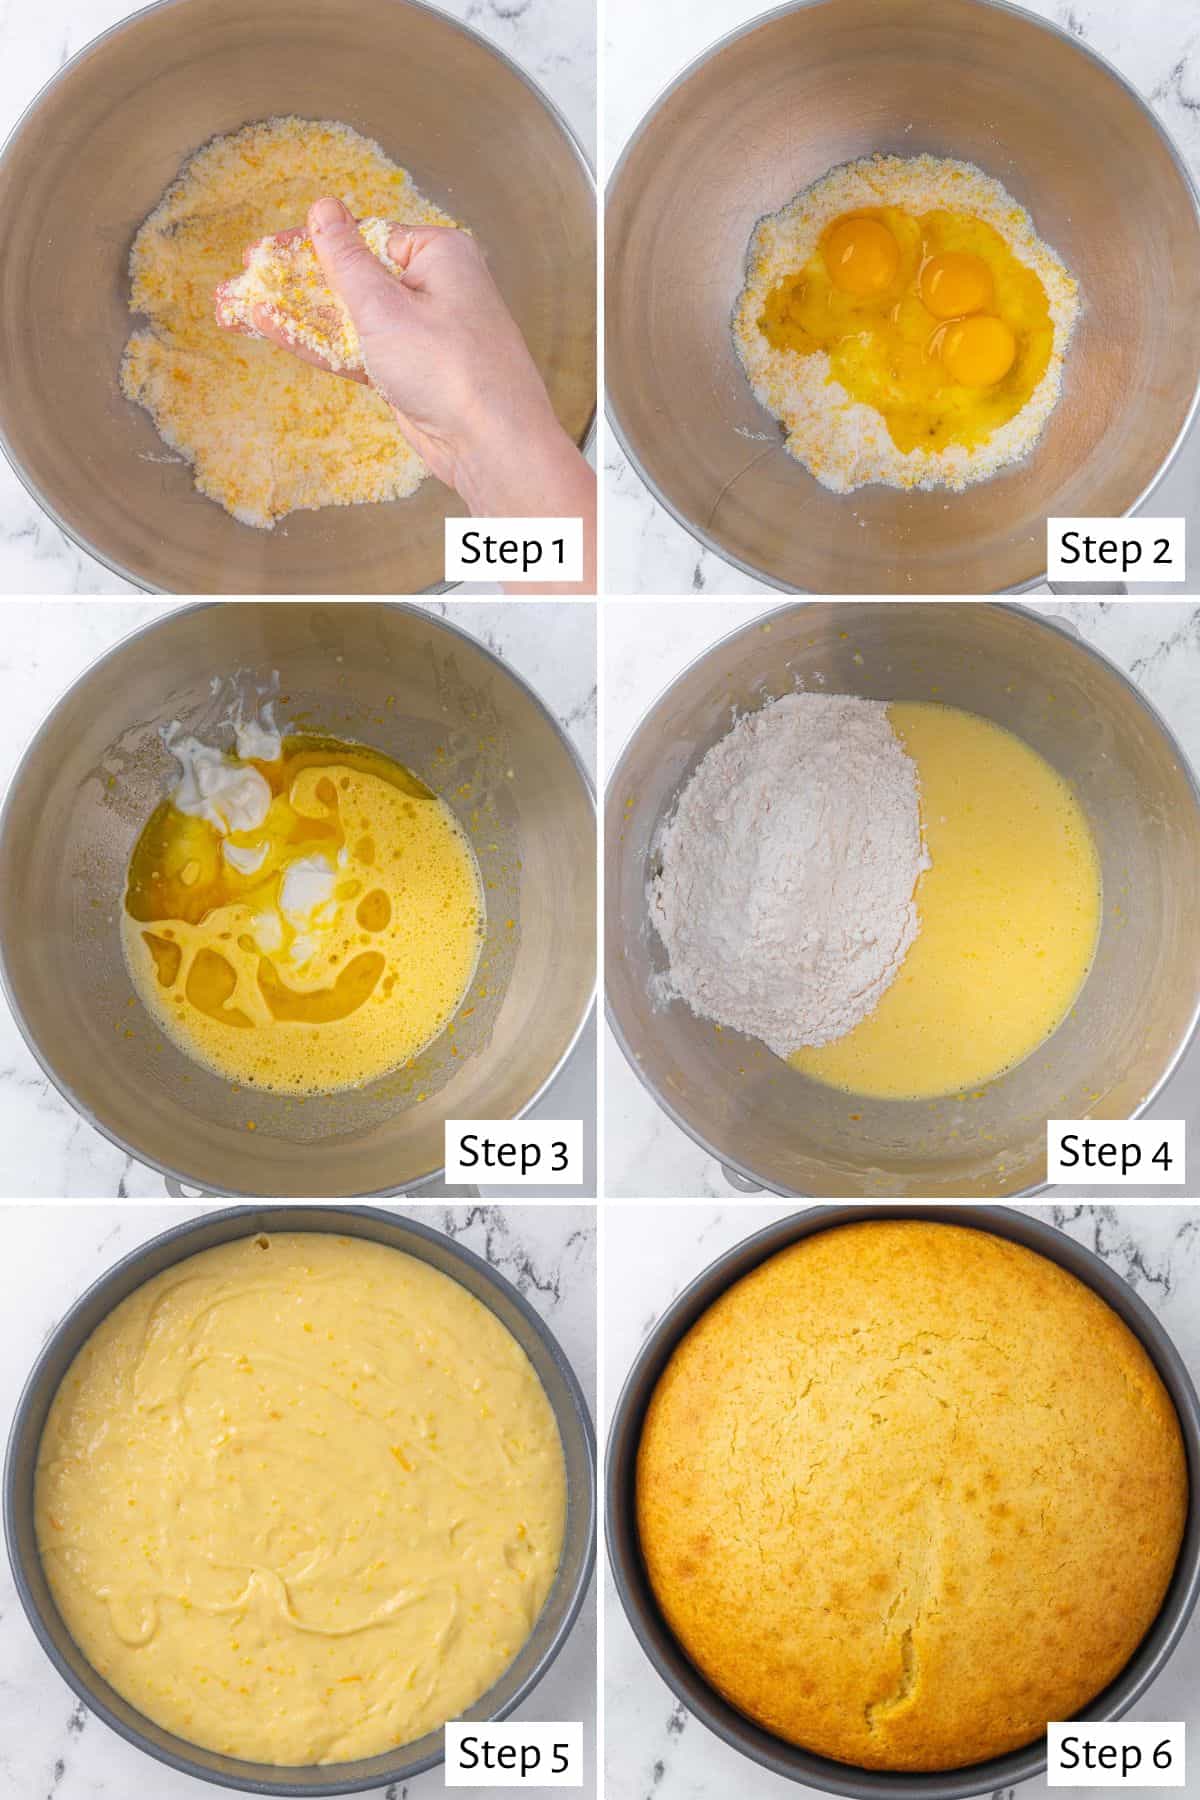 6-image collage making the cake batter: 1 - Hands massaging orange zest and sugar in the bowl of a stand mixer; 2 - Eggs added before mixing; 3 - After mixing until light and fluffy with oil, yogurt, and orange juice added; 4 - After mixing with dry mixture added on top of wet; 5 - Cake batter in prepared cake pan before baking; 6 - After baking.